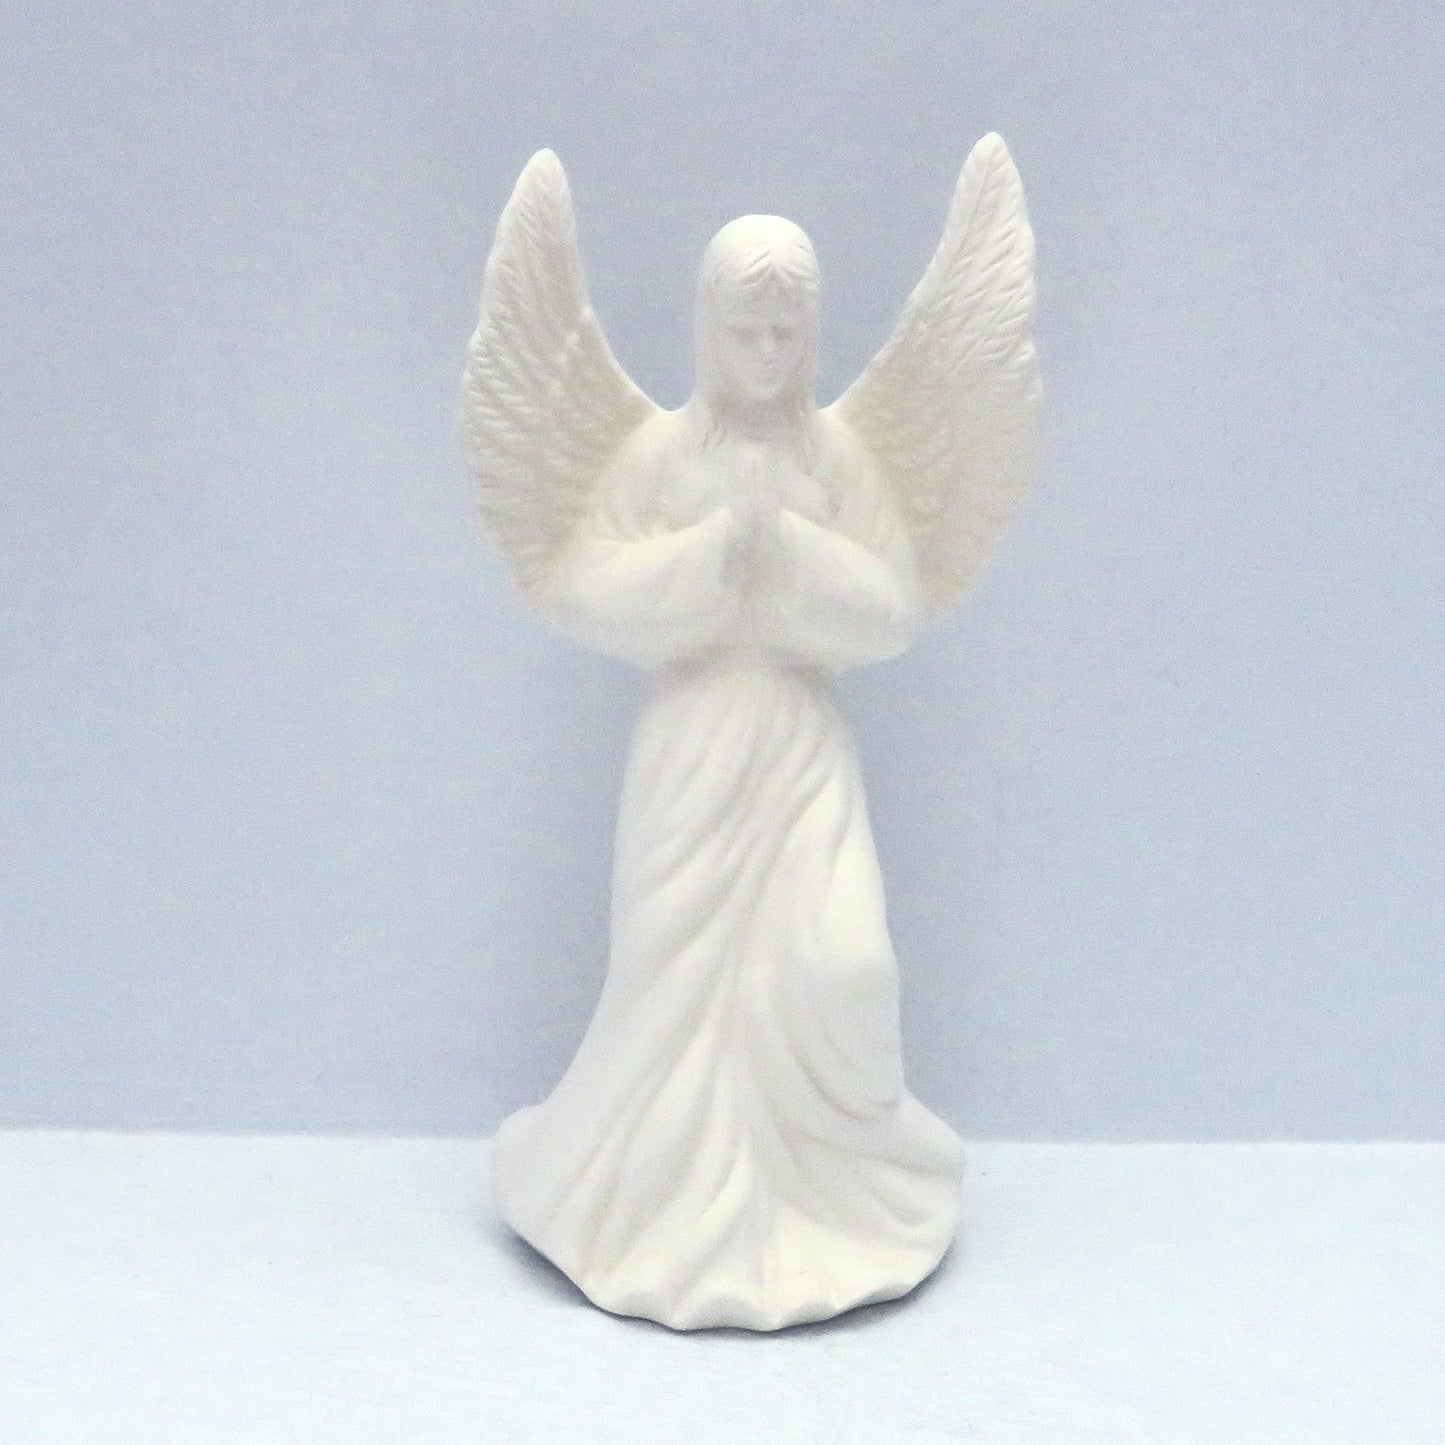 Unpainted ceramic praying angel figurine on a pale blue surface.  Her wings are outstretched and her head is slightly bowed.